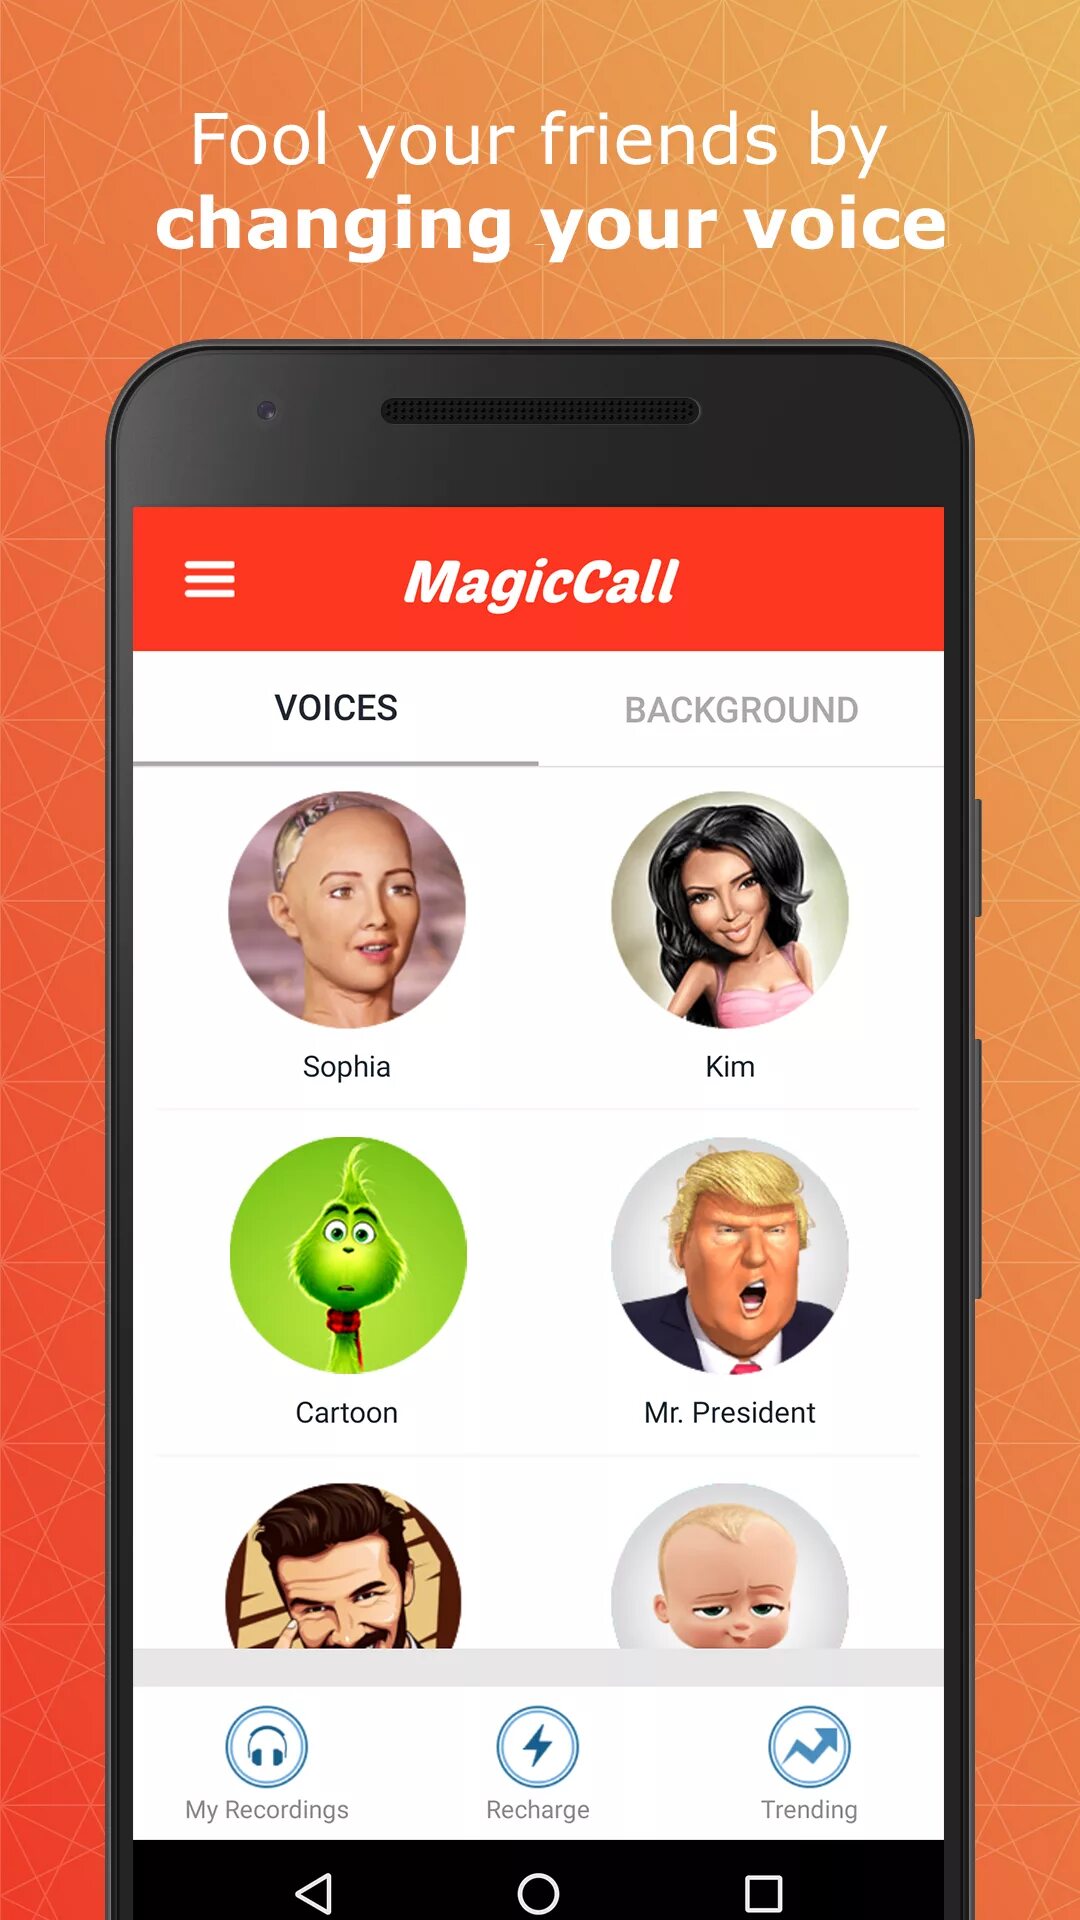 Magiccall. Voice Changer app. Voice Changer Android. Voice Changer Google Play. Программа 2018 года для андроид the Voice Changer.